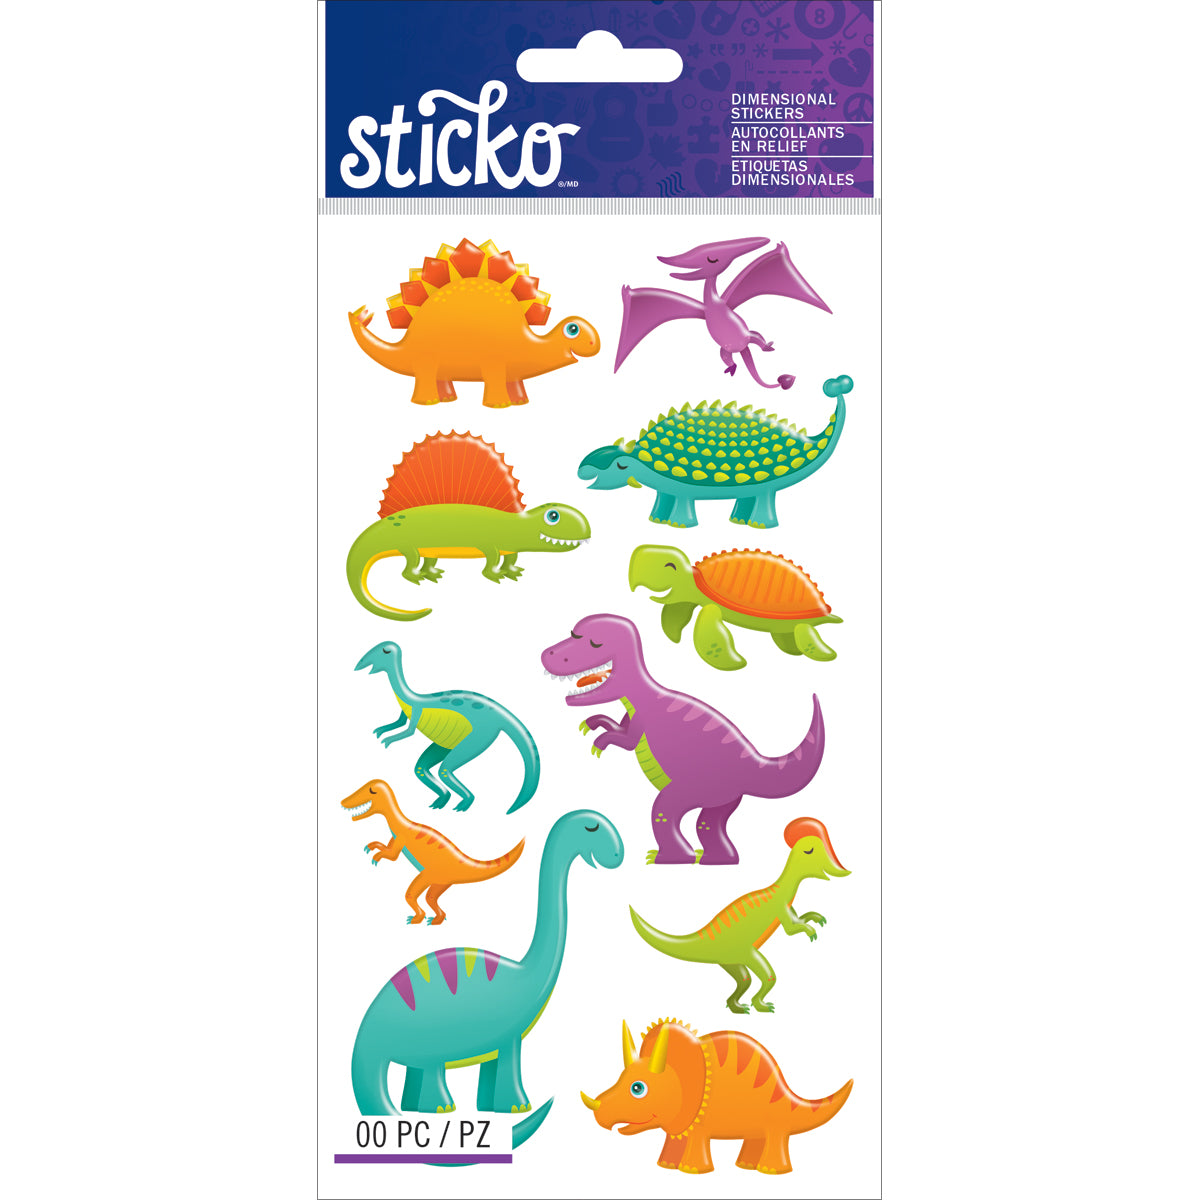 Sticko Dimensional Stickers-Dinosaurs